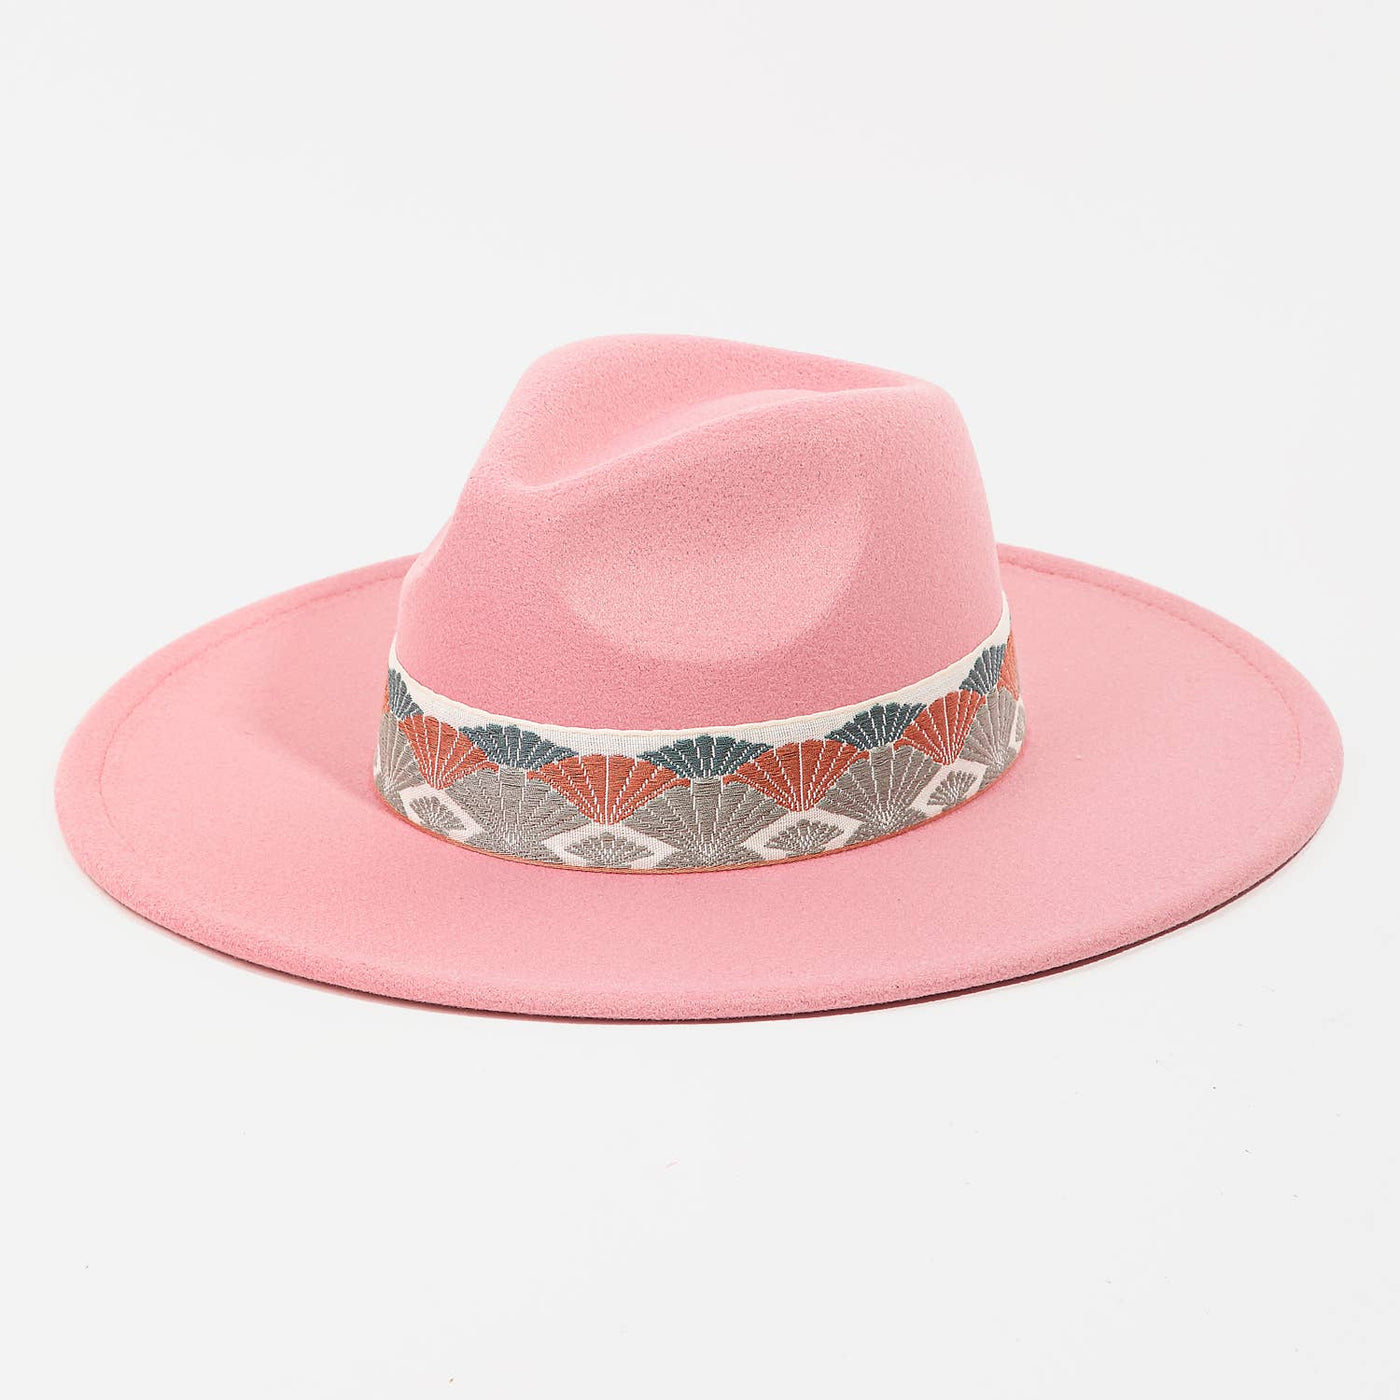 Embroidered Pattern Fedora Hat